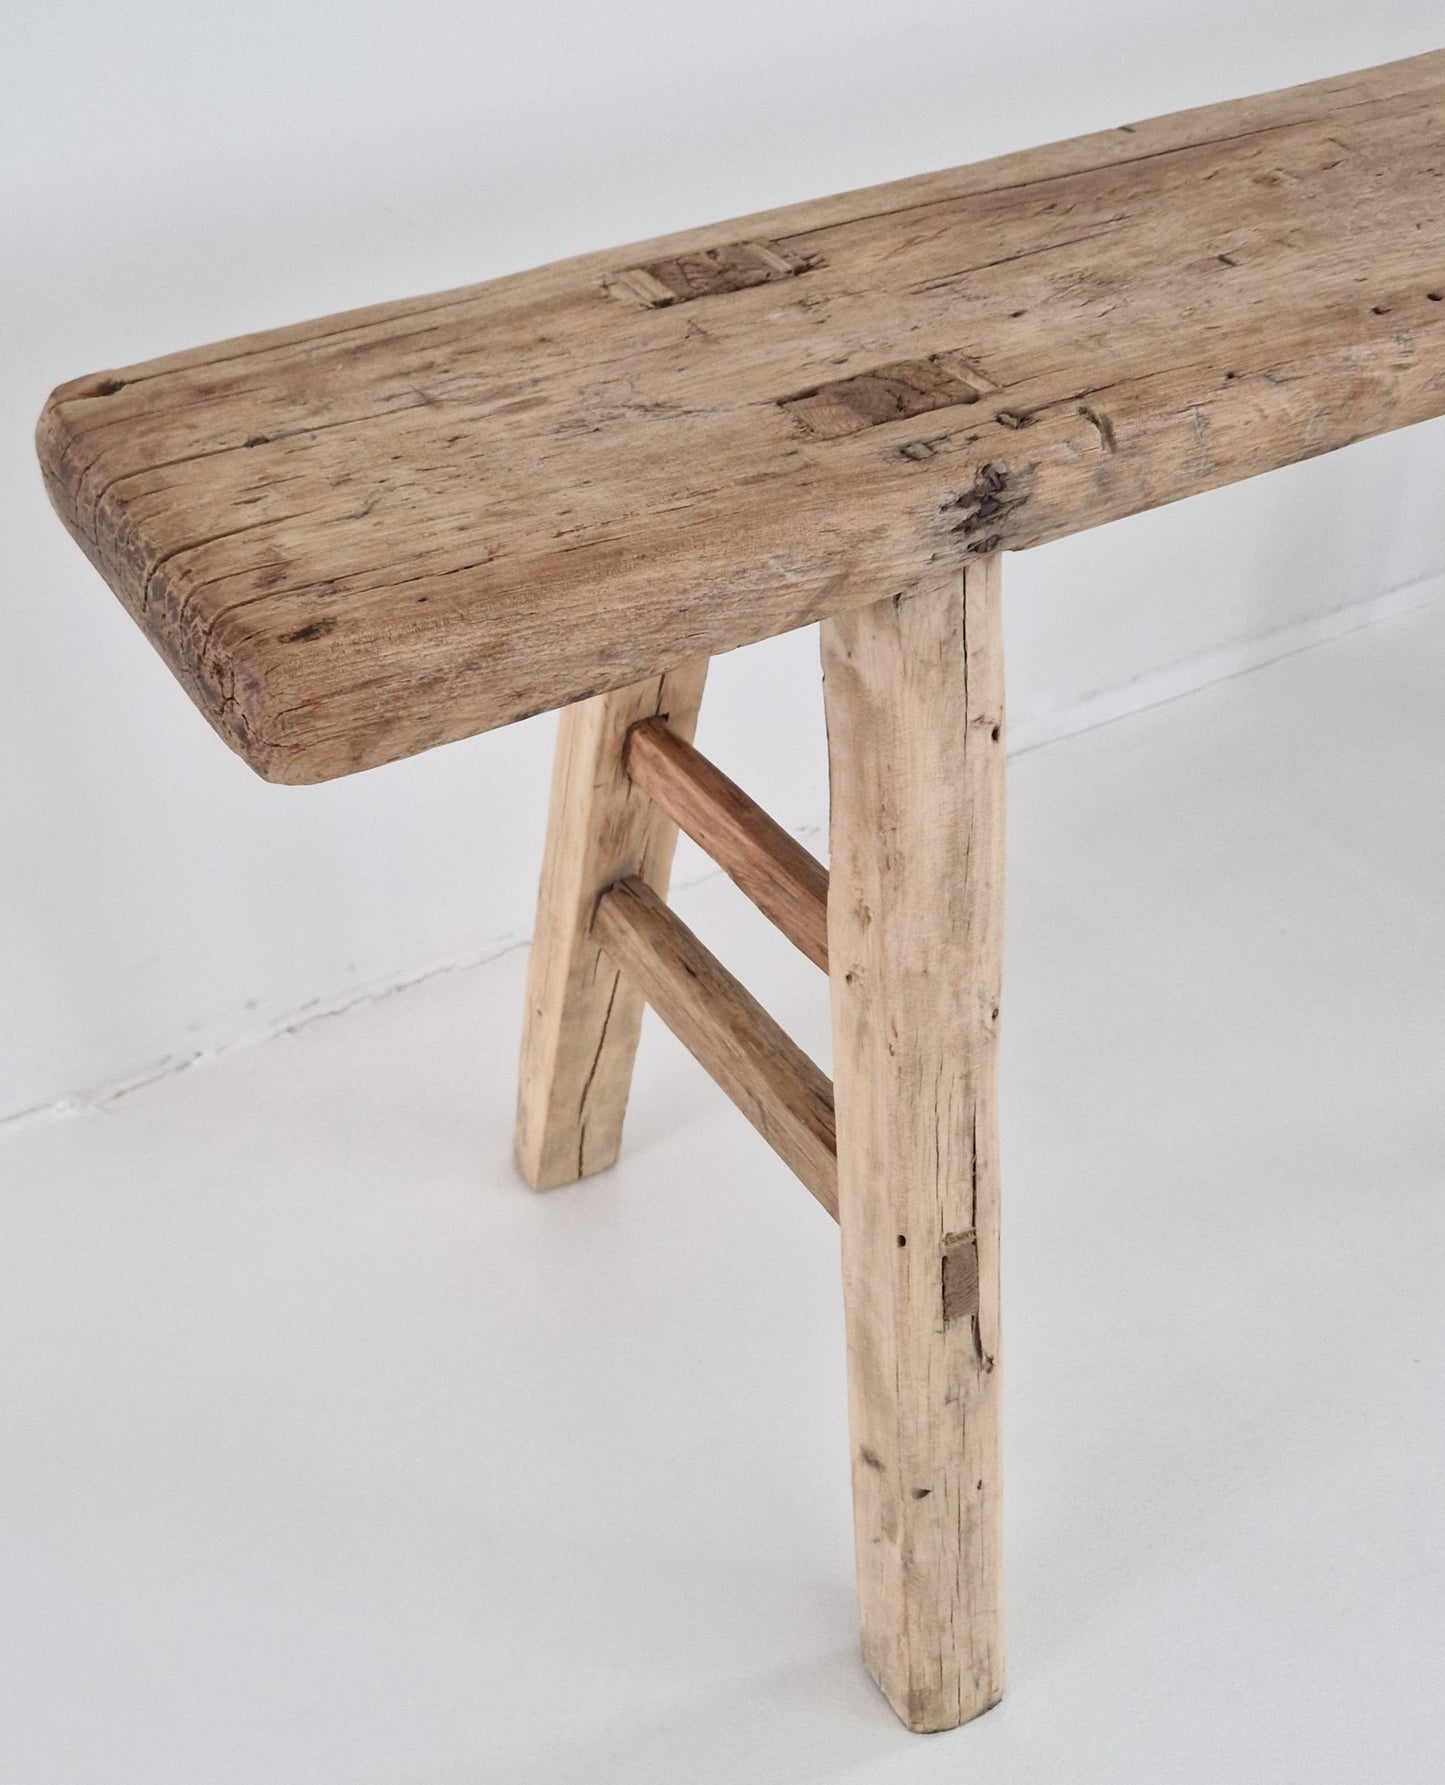 Old wooden bench #1 (117cm)